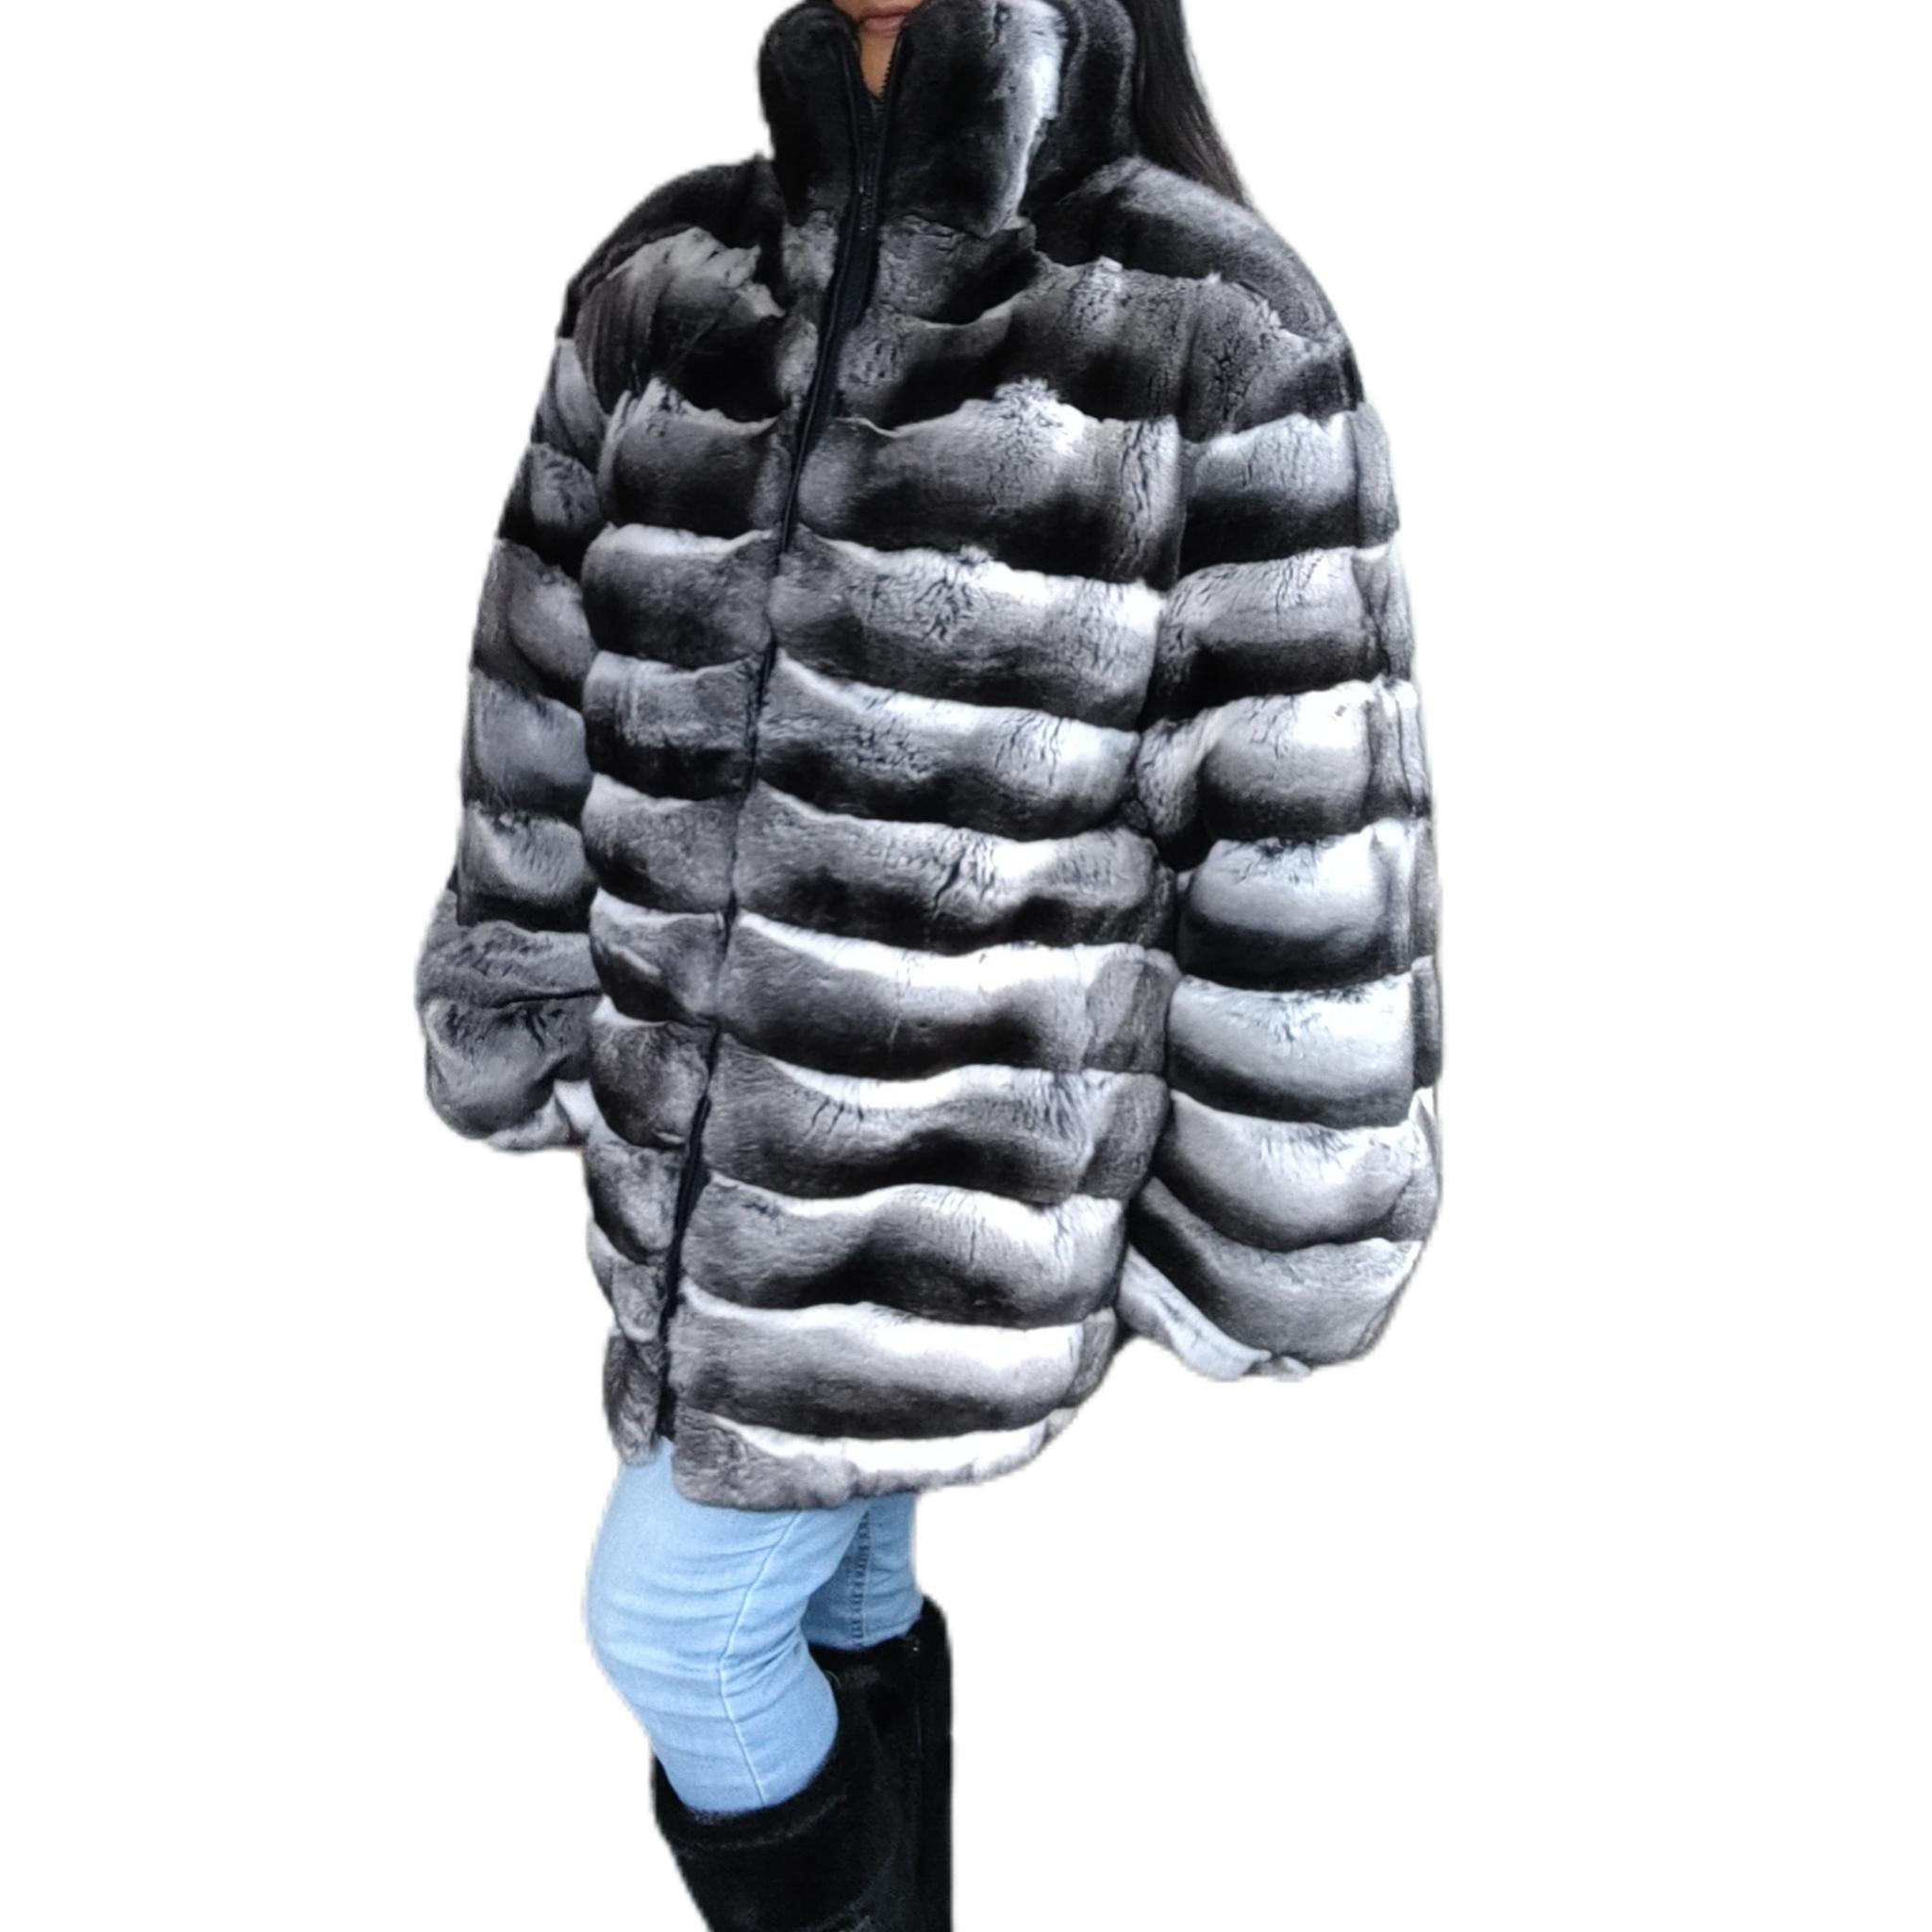 Brand new Unisex Chinchilla Fur zip collar Coat 44 18 L

This beautiful straight collar, big wide sleeves, zipper for closure and too slit pockets. It a black Kasha satin lining and finished perfectly. 

Made in Canada with the best quality supple